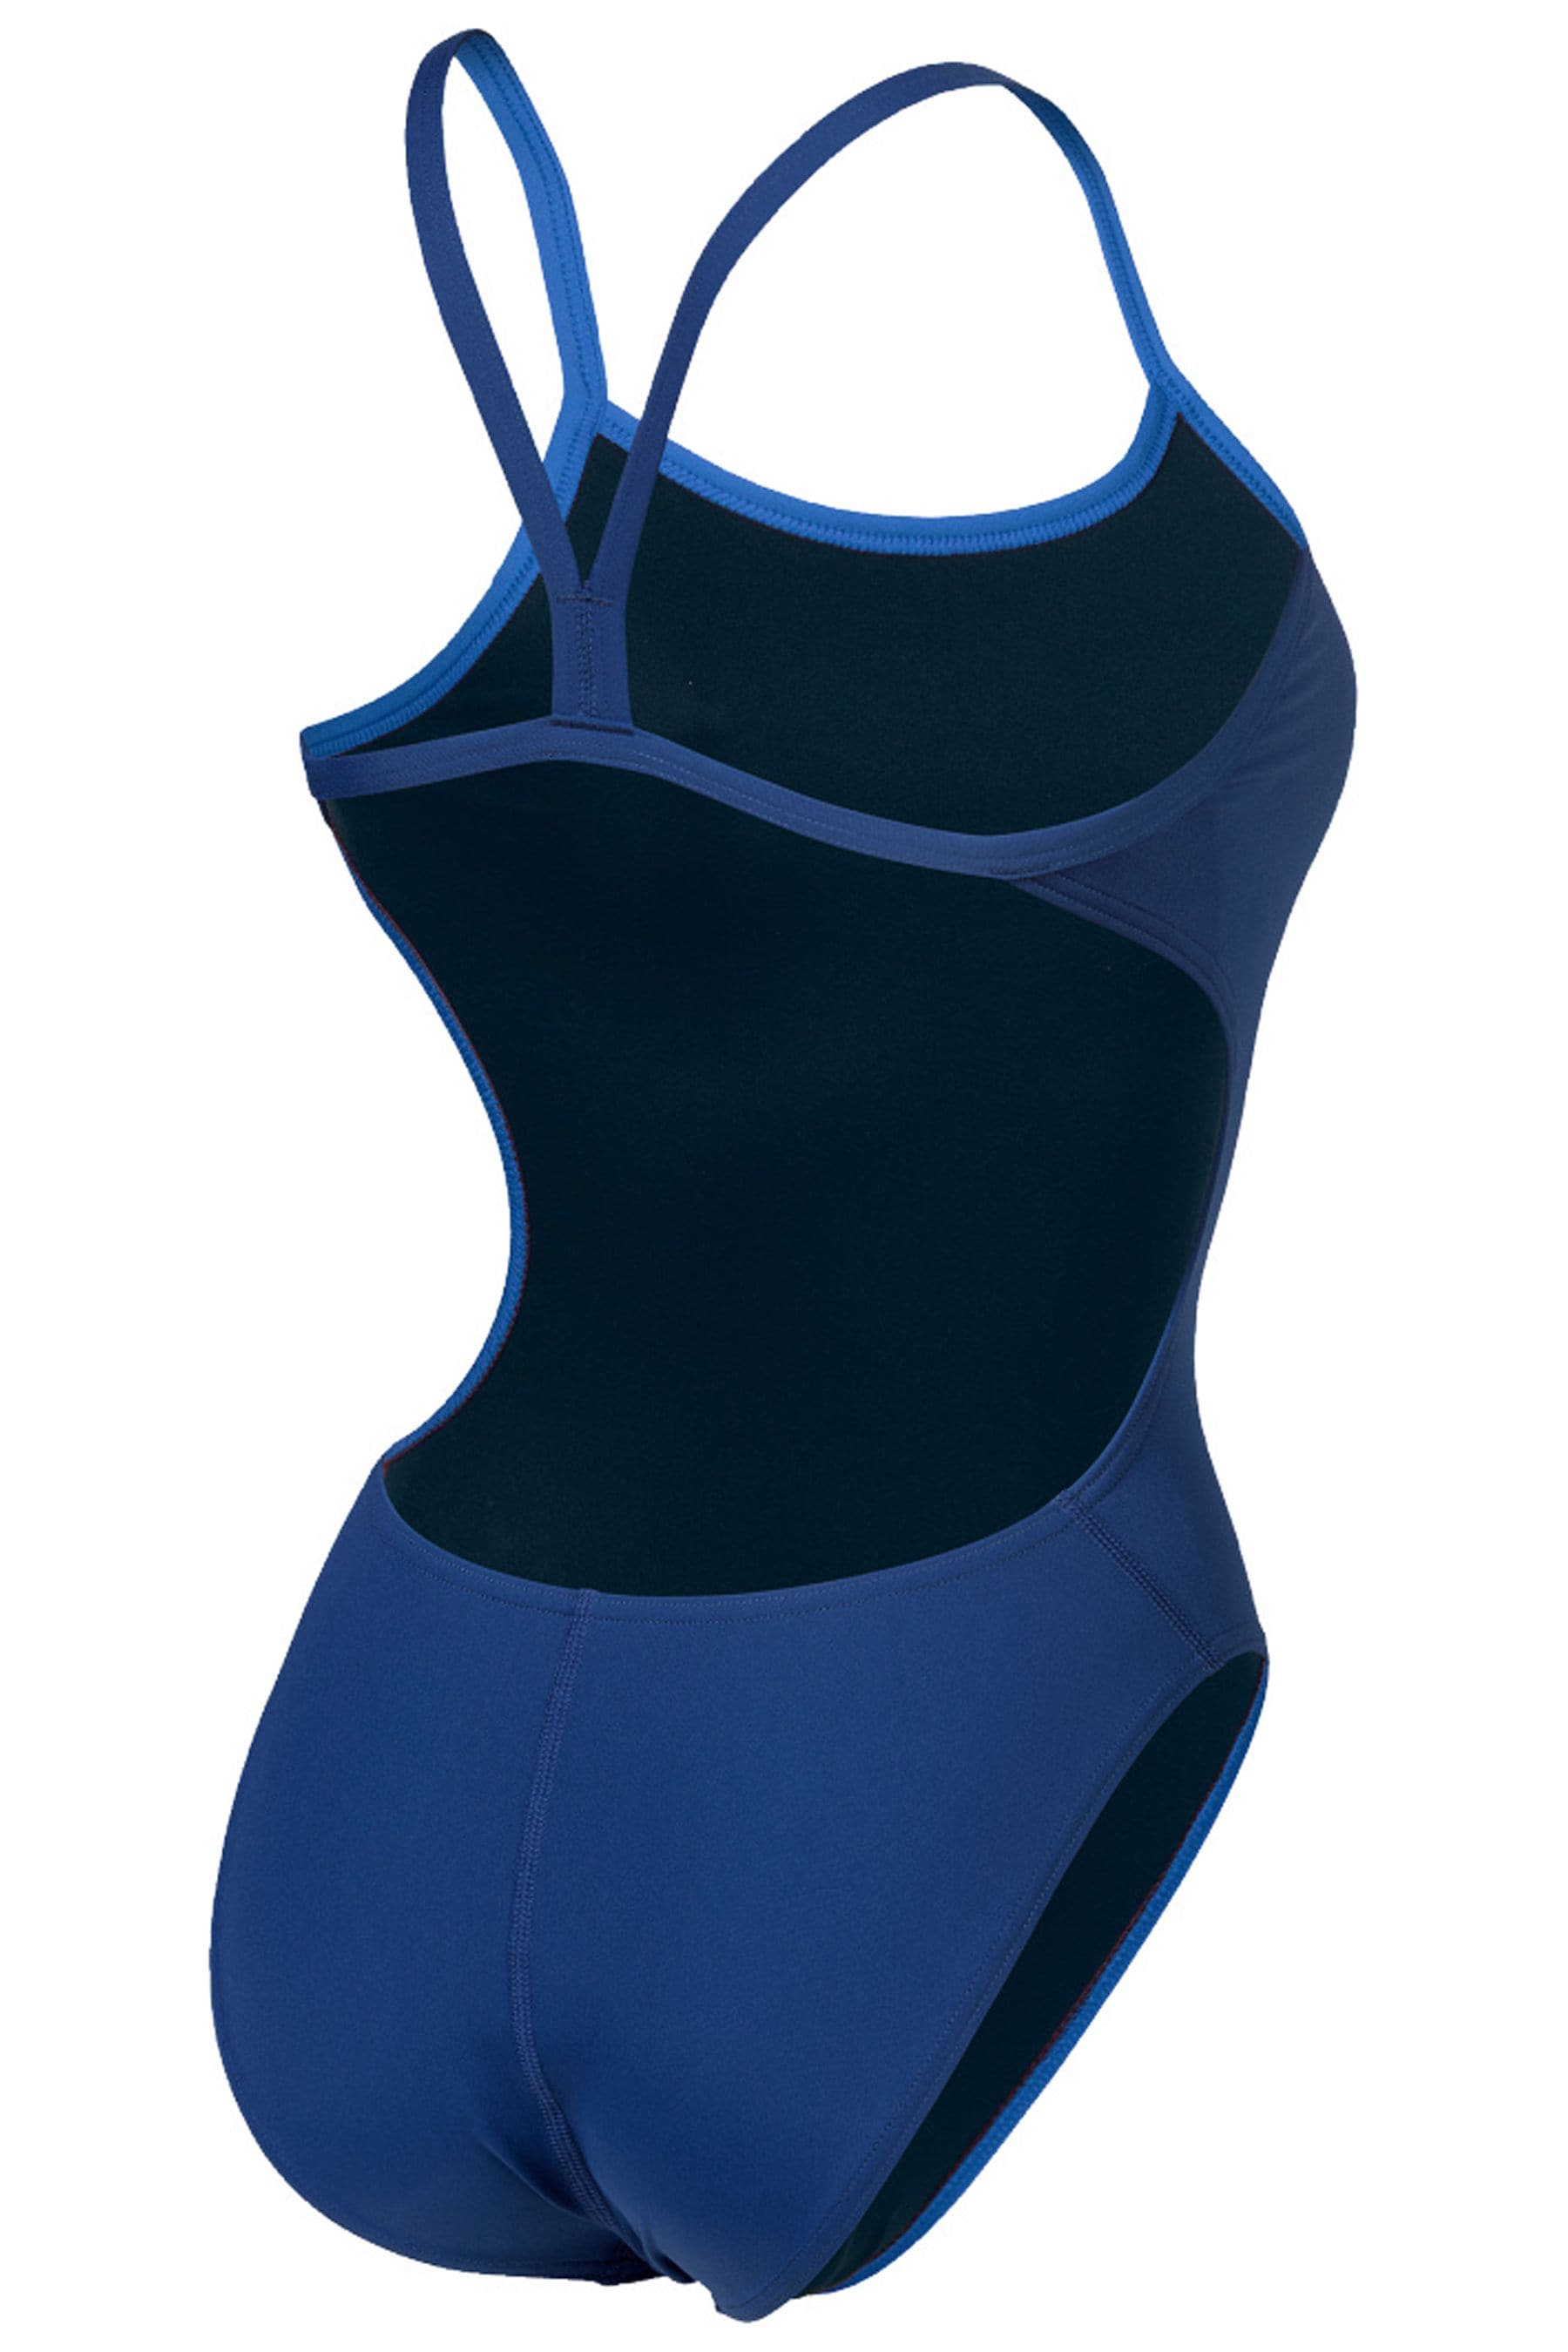 Buy Arena Womens Blue Team Swimsuit from the Next UK online shop